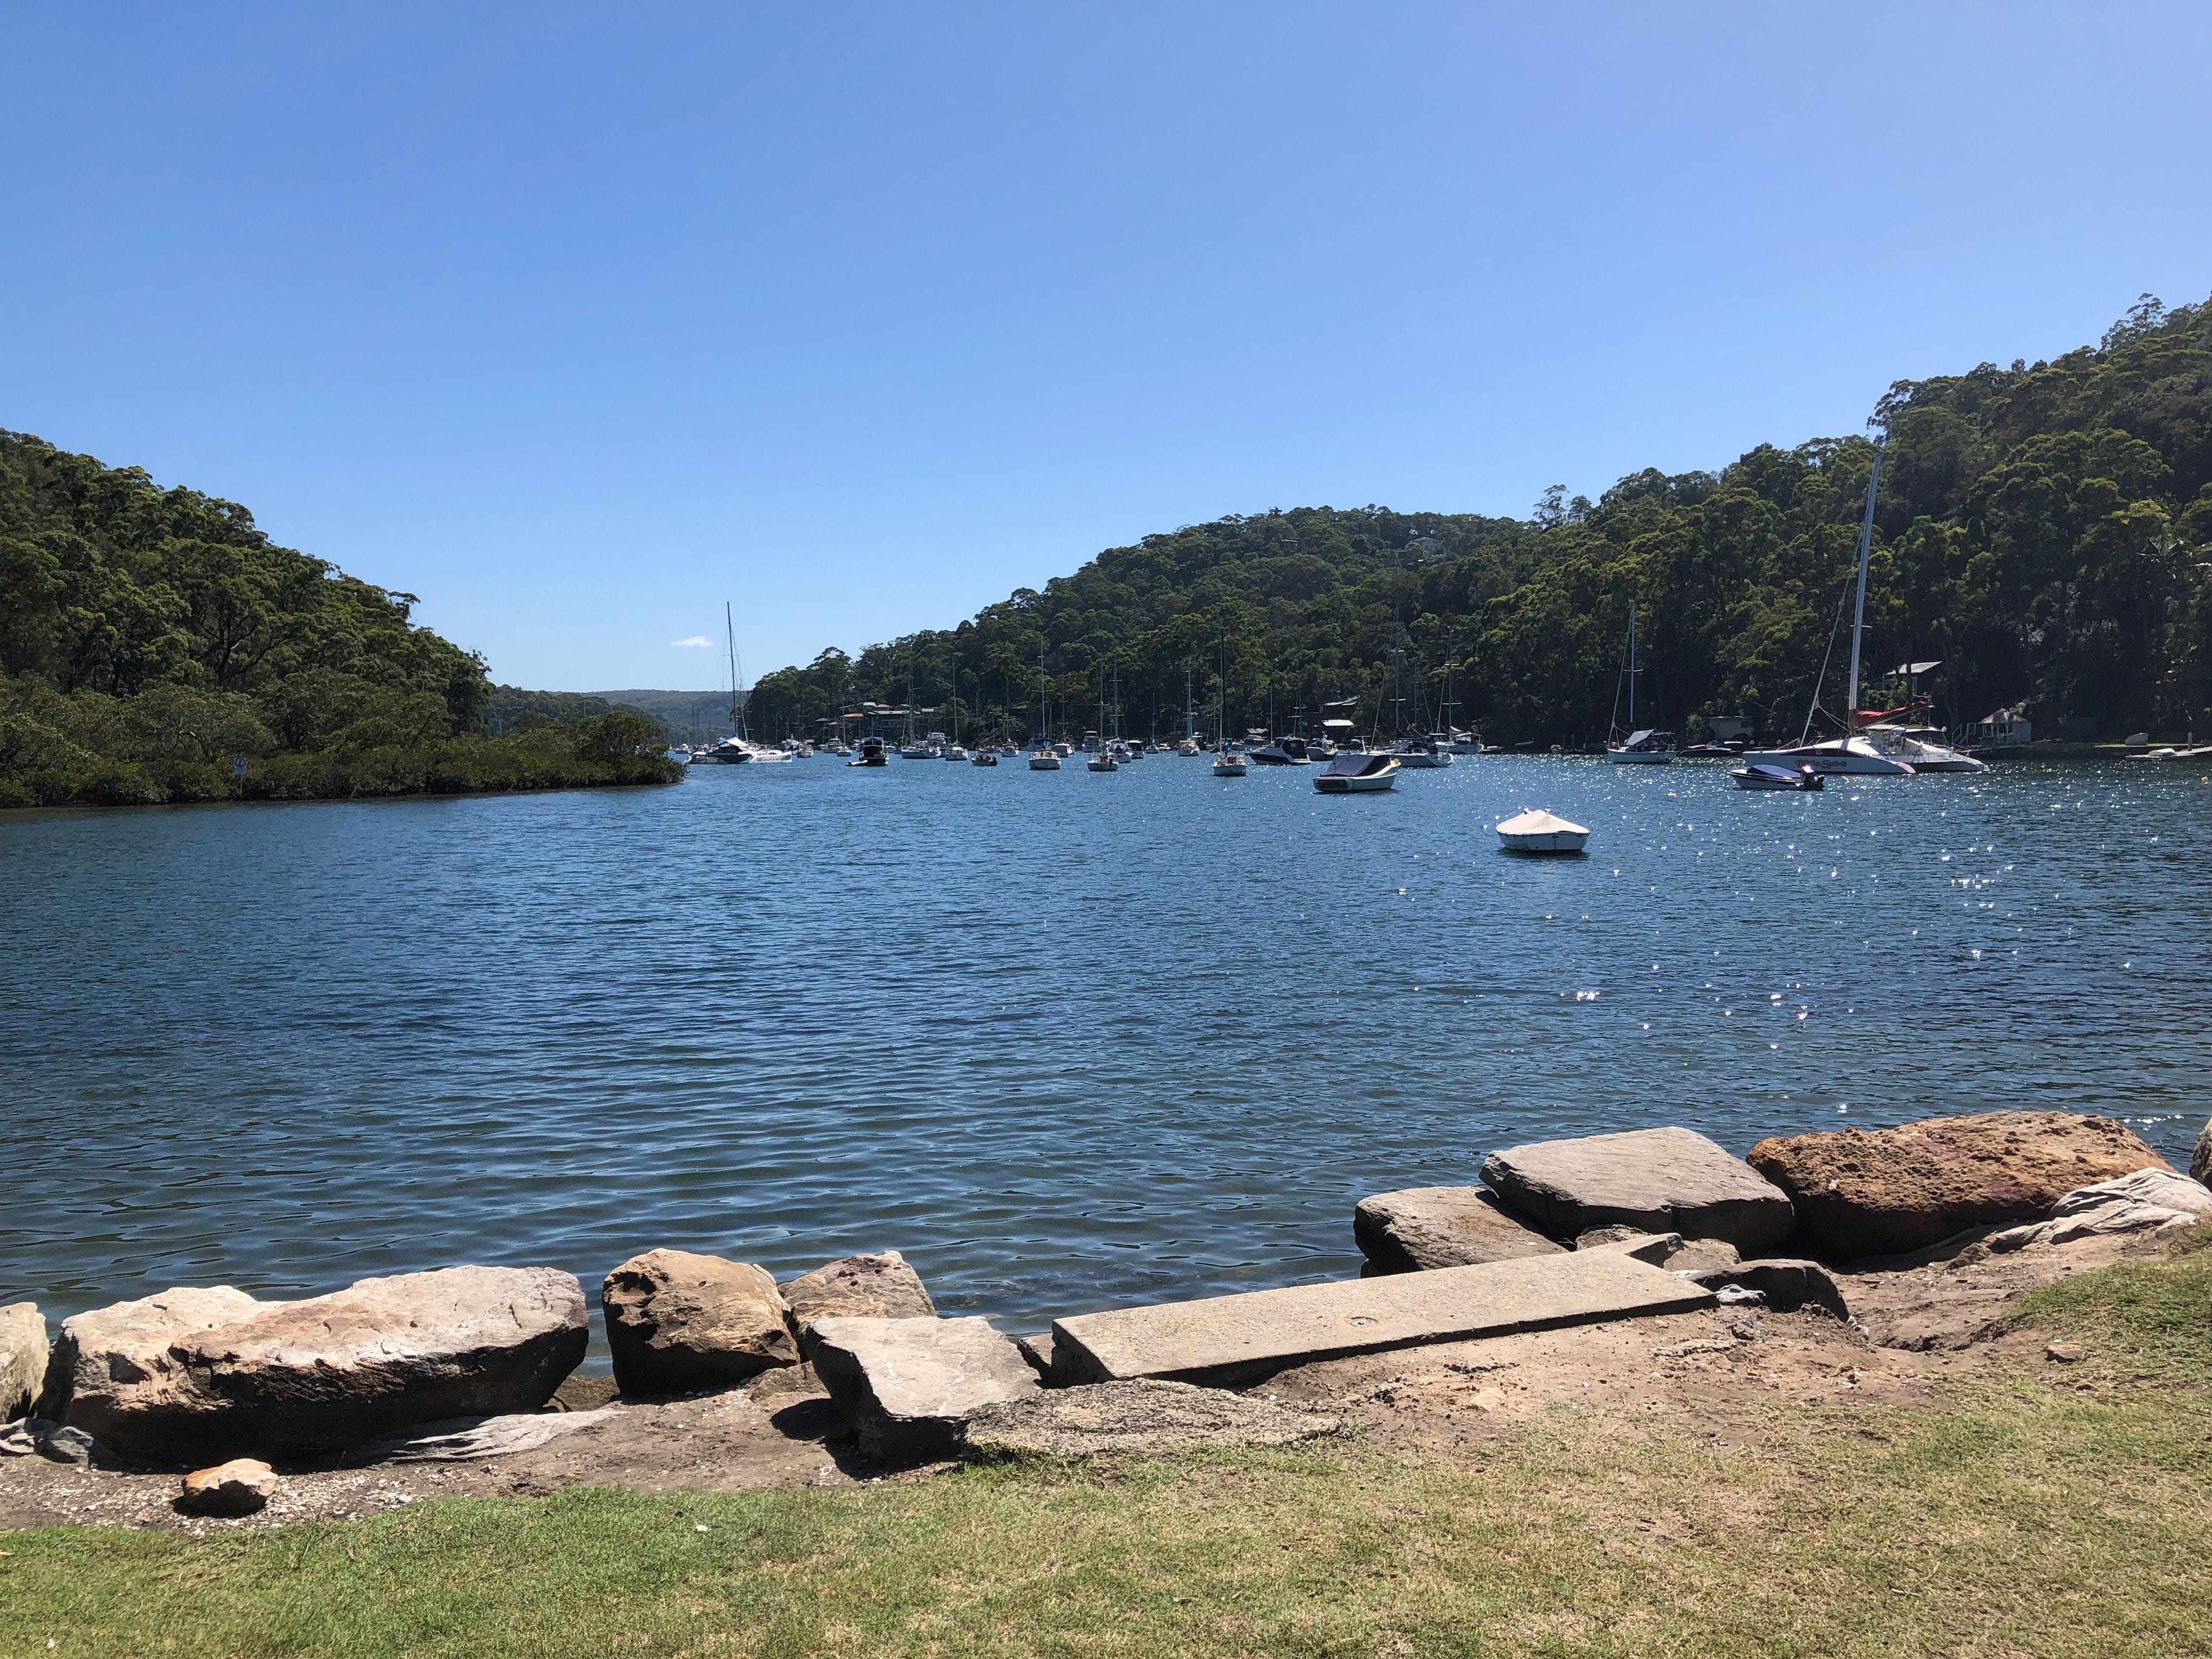 Northern Beaches Public Day Tour febuary 2019 Image -5c649629d3050